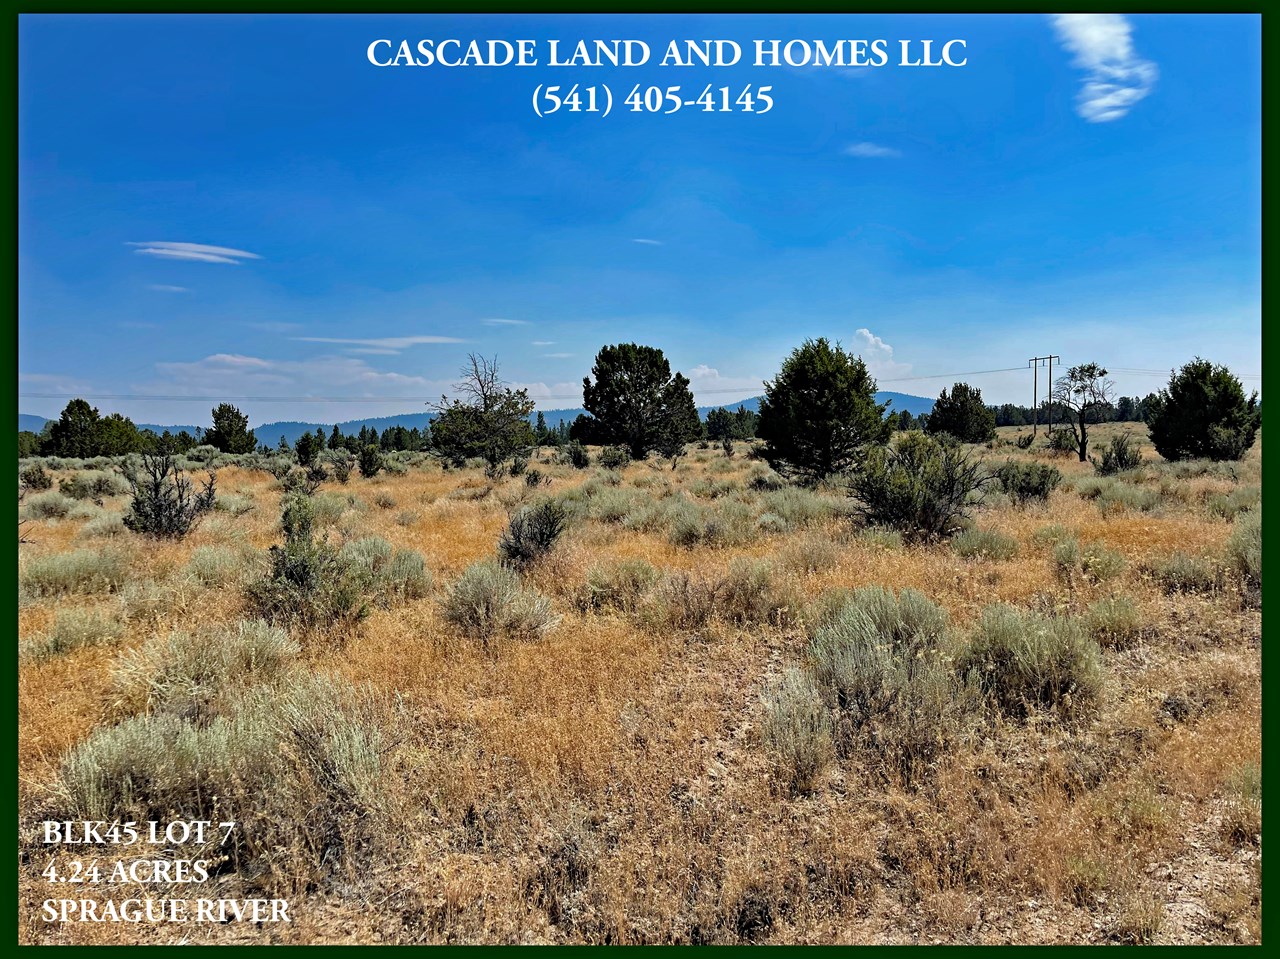 this is a beautiful, fairly flat parcel that looks out over the rangeland and surrounding foothills that lead to the lush sprague river valley. it is so peaceful here, you can hear the warm, gentle wind blowing across the plateau, and birds overhead. many of the lots within the subdivision do not have homes yet, and many are used primarily for vacation or base-camp spots for the nearby outdoor recreation opportunities. this would be the perfect place if you are wanting to get away from a busy lifestyle and enjoy the peacefulness here.